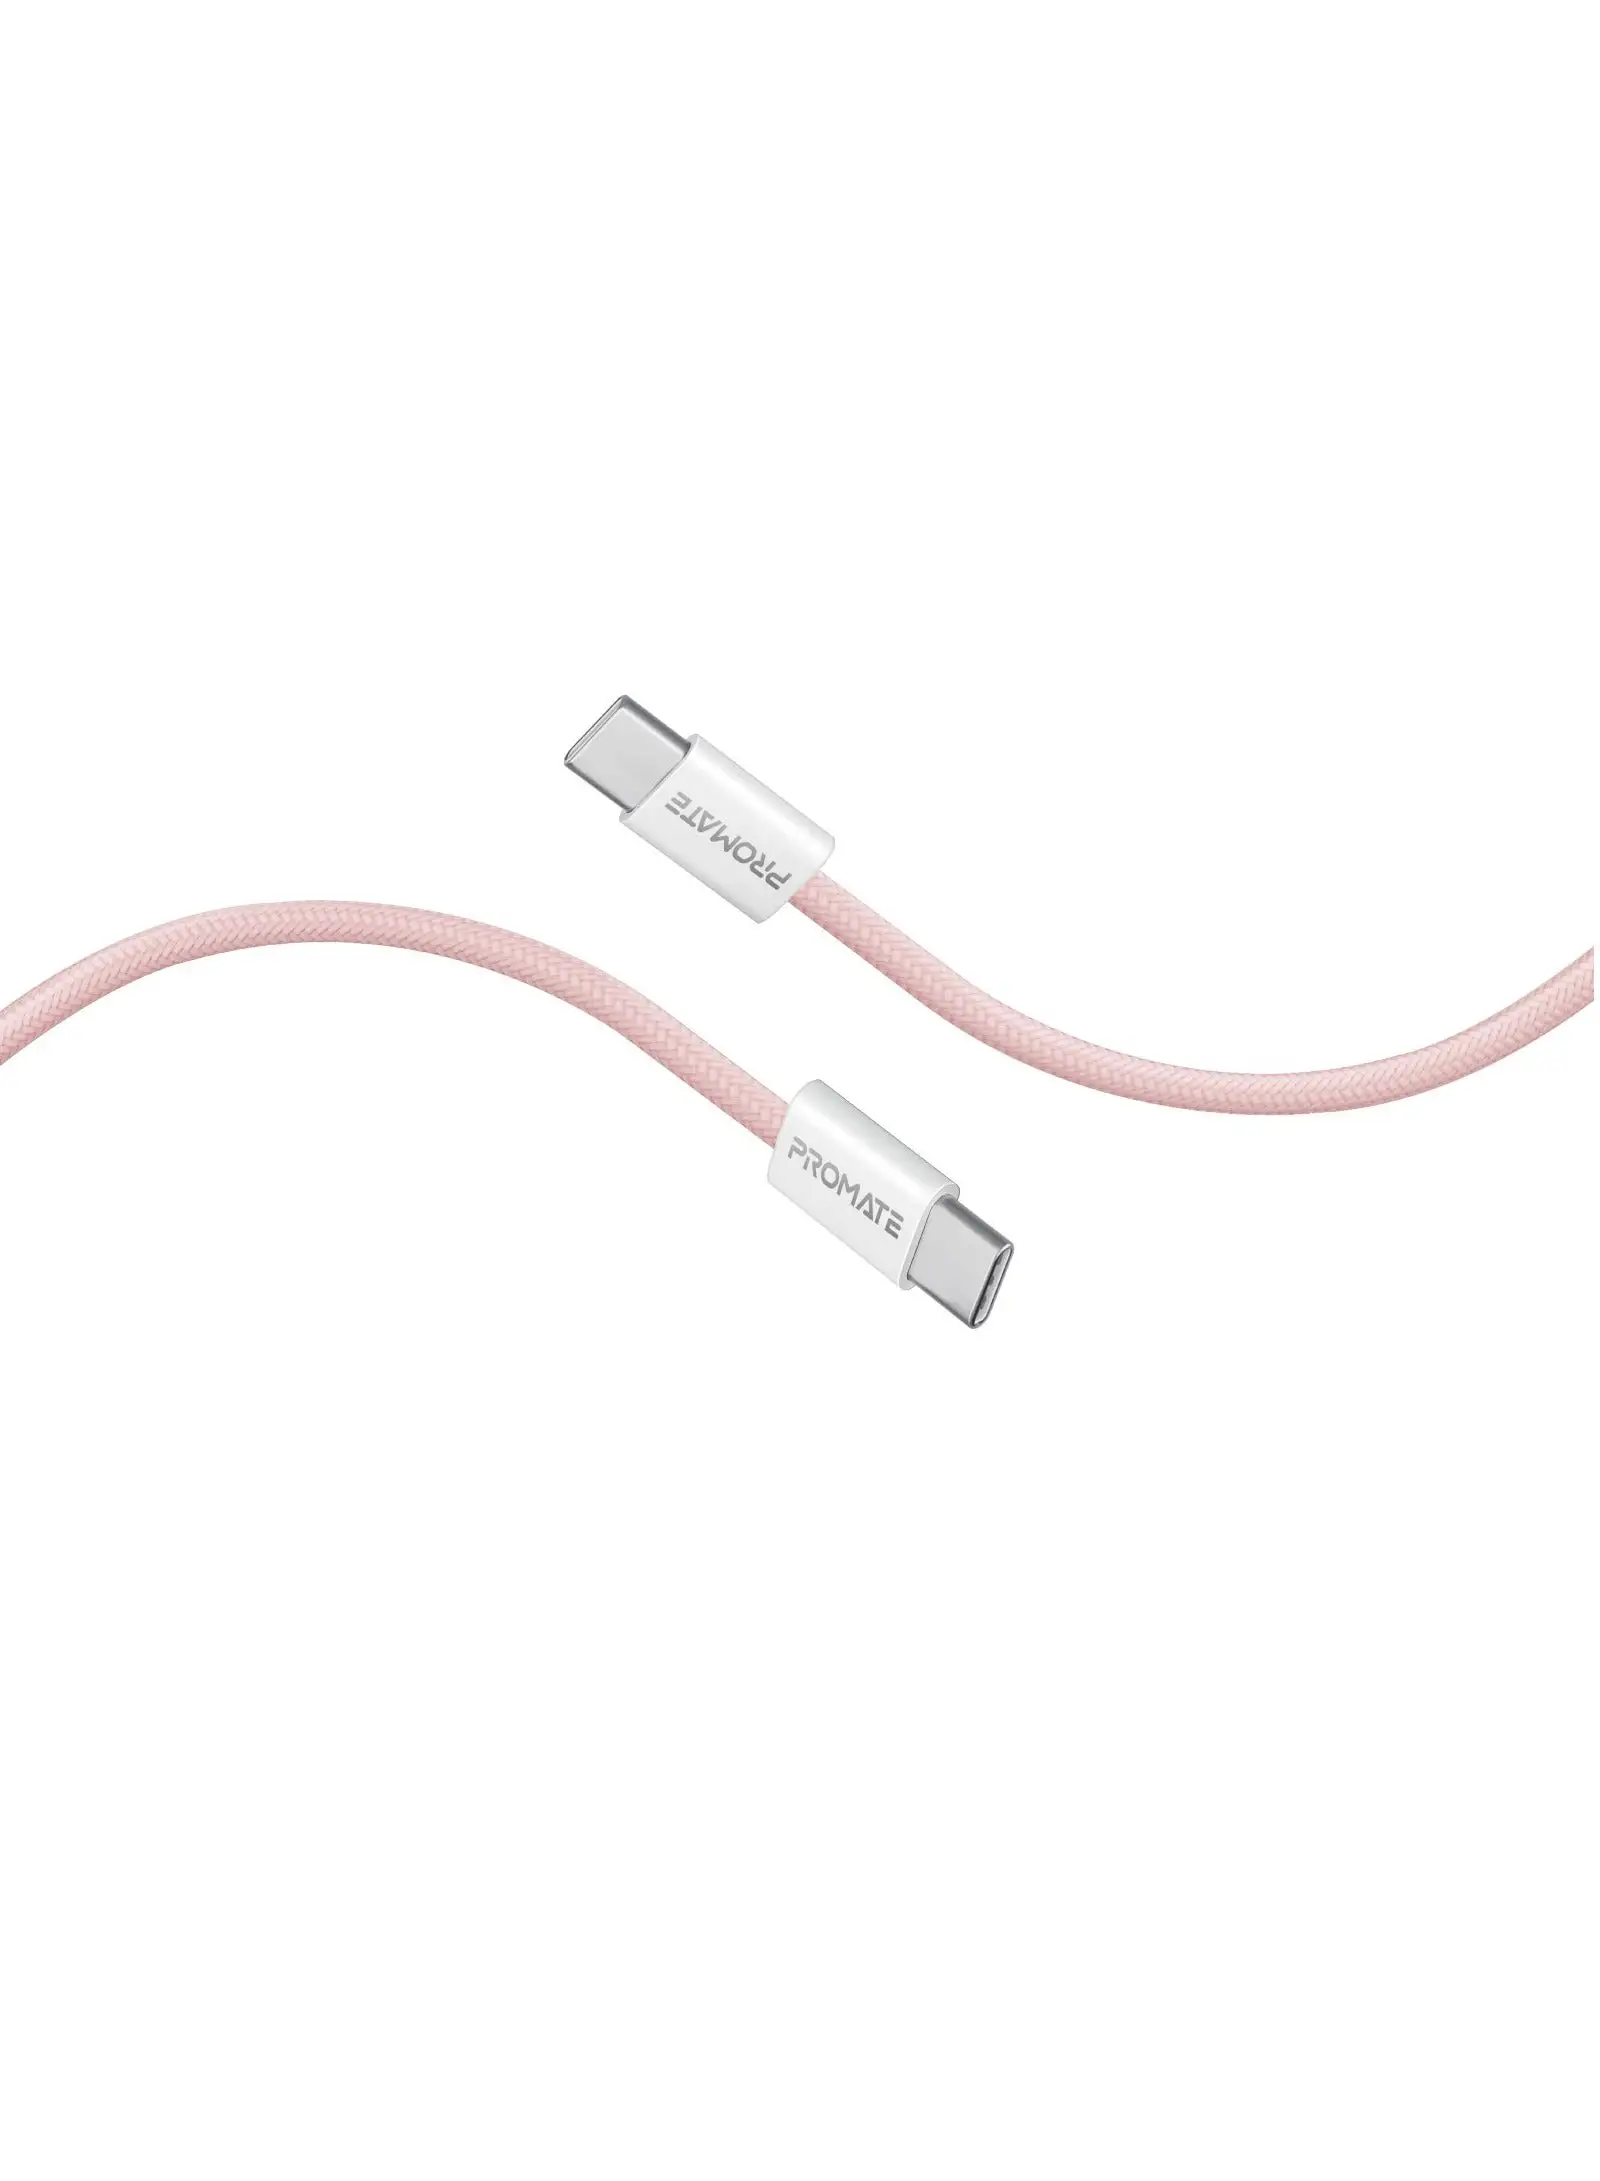 PROMATE USB-C Charging Cable, Powerful Sync Charge Type-C Cable with 60W Fast Power Delivery, 480Mbps Data Transfer and 200cm Tangle-Free Nylon Braided Cord, EcoLine-CC200 Pink